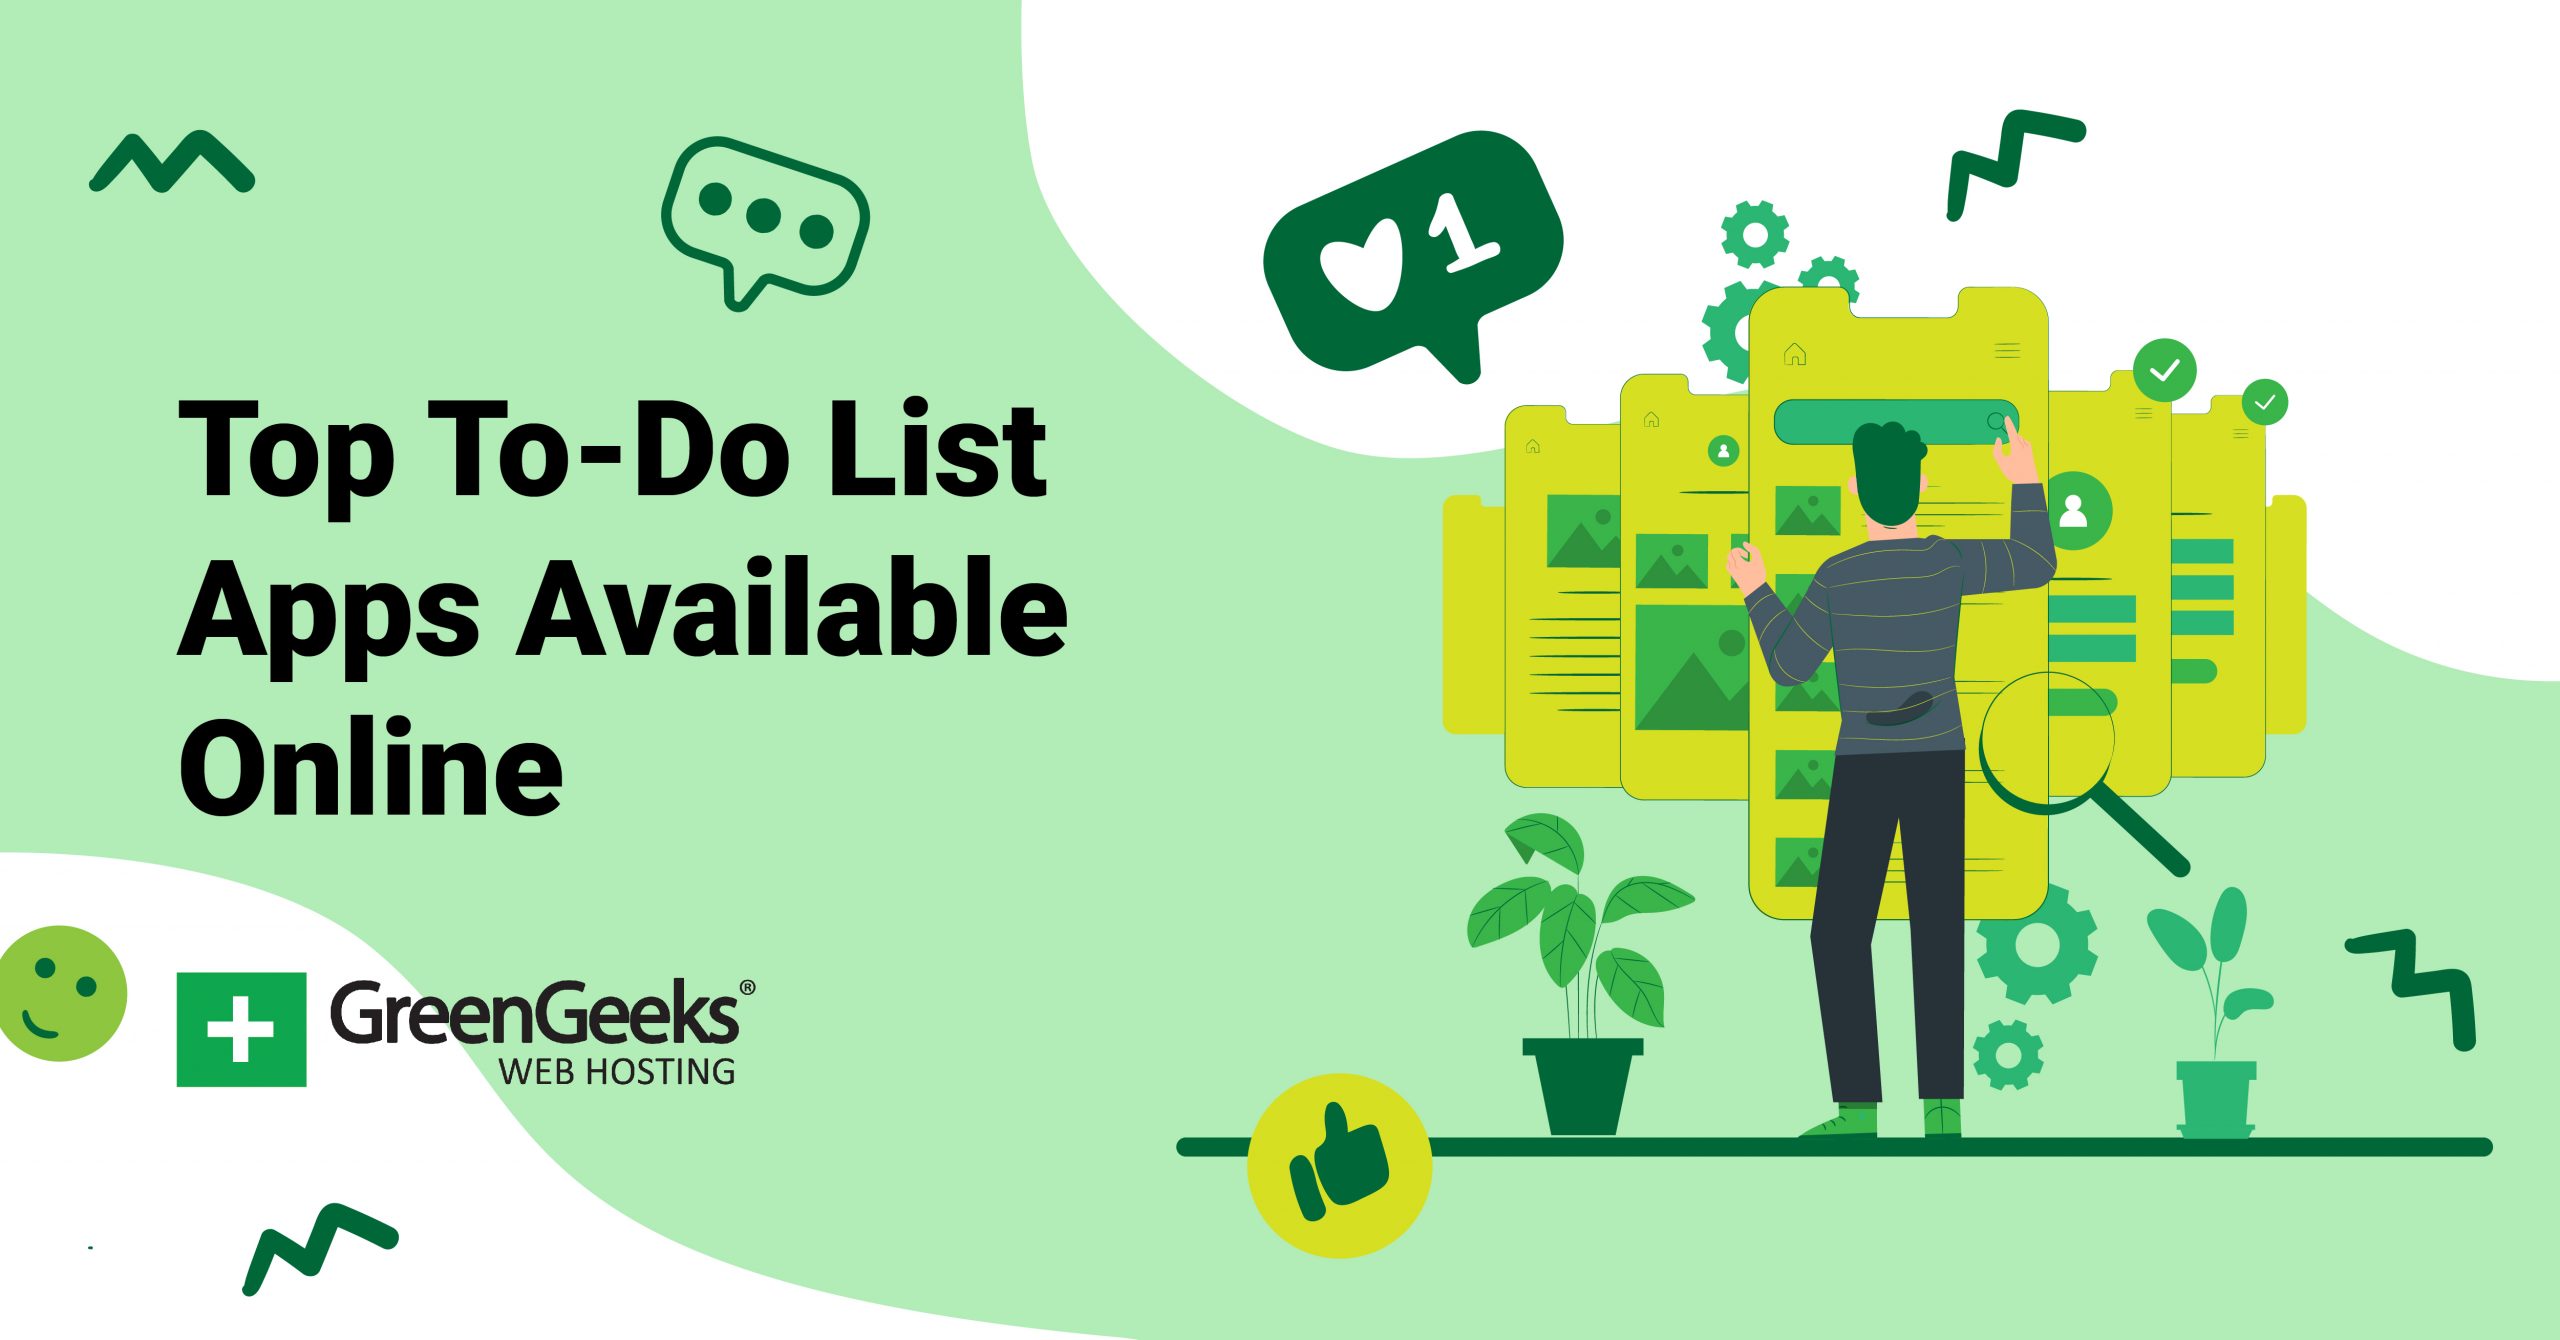 15 Top ToDo List Apps on the That'll Help You Succeed